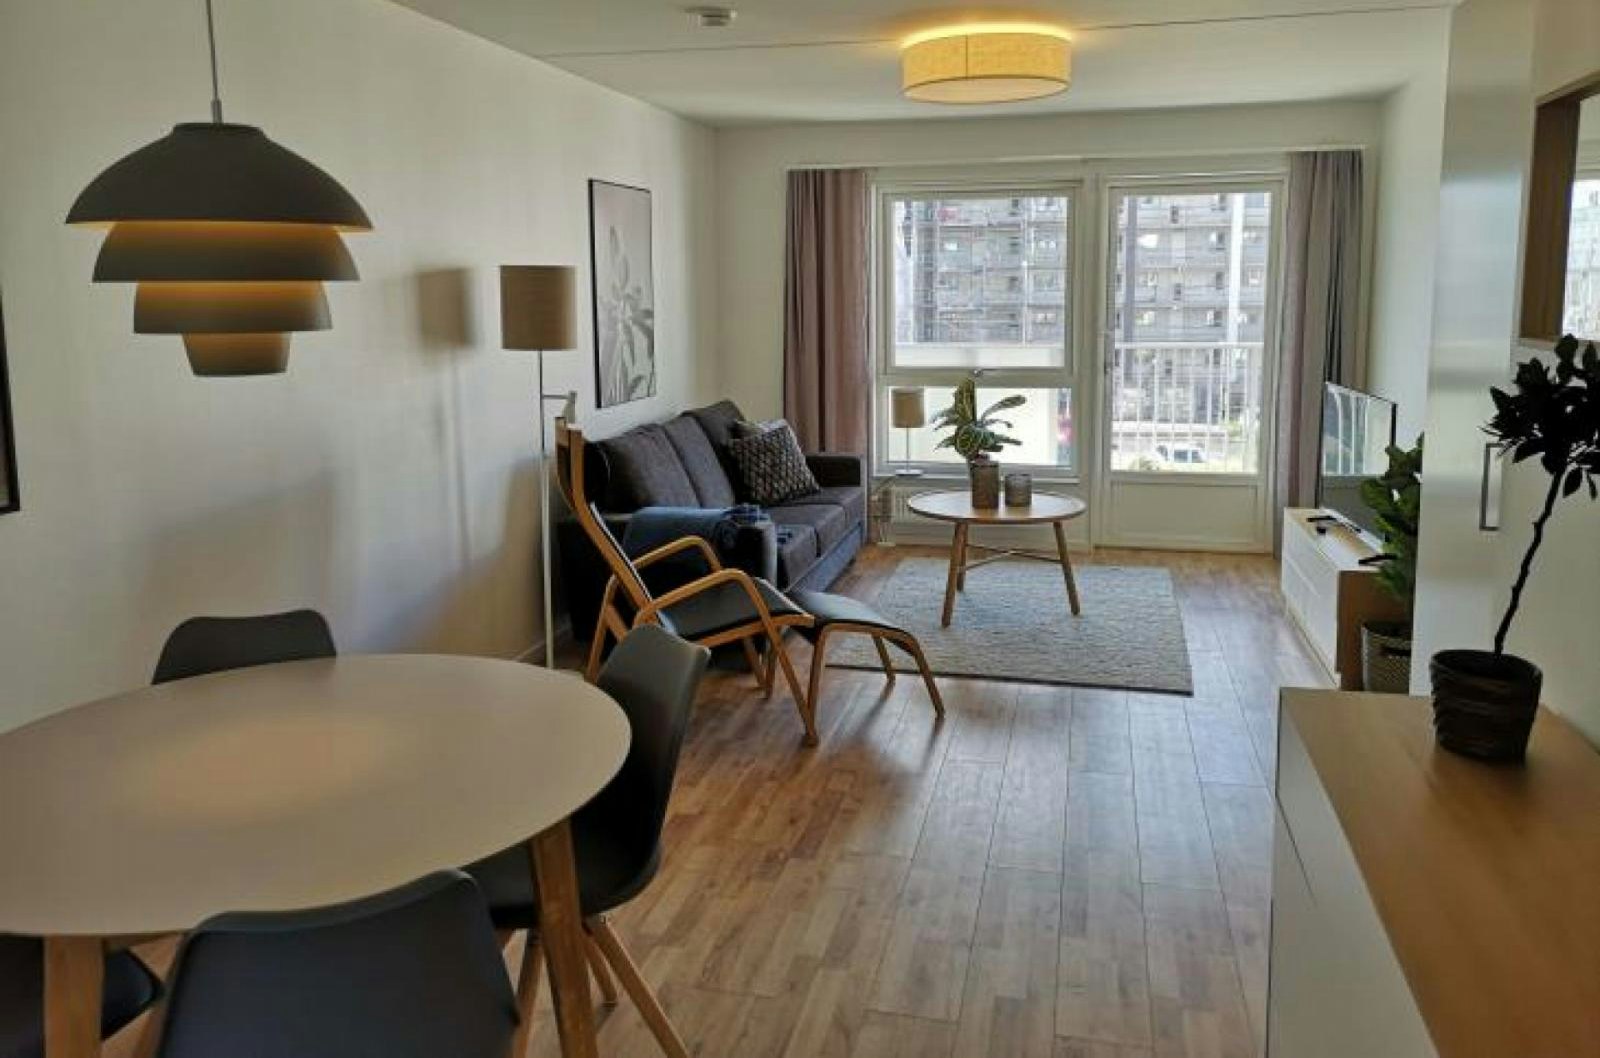 Charming 2-bedroom apartment in Fredriksdal